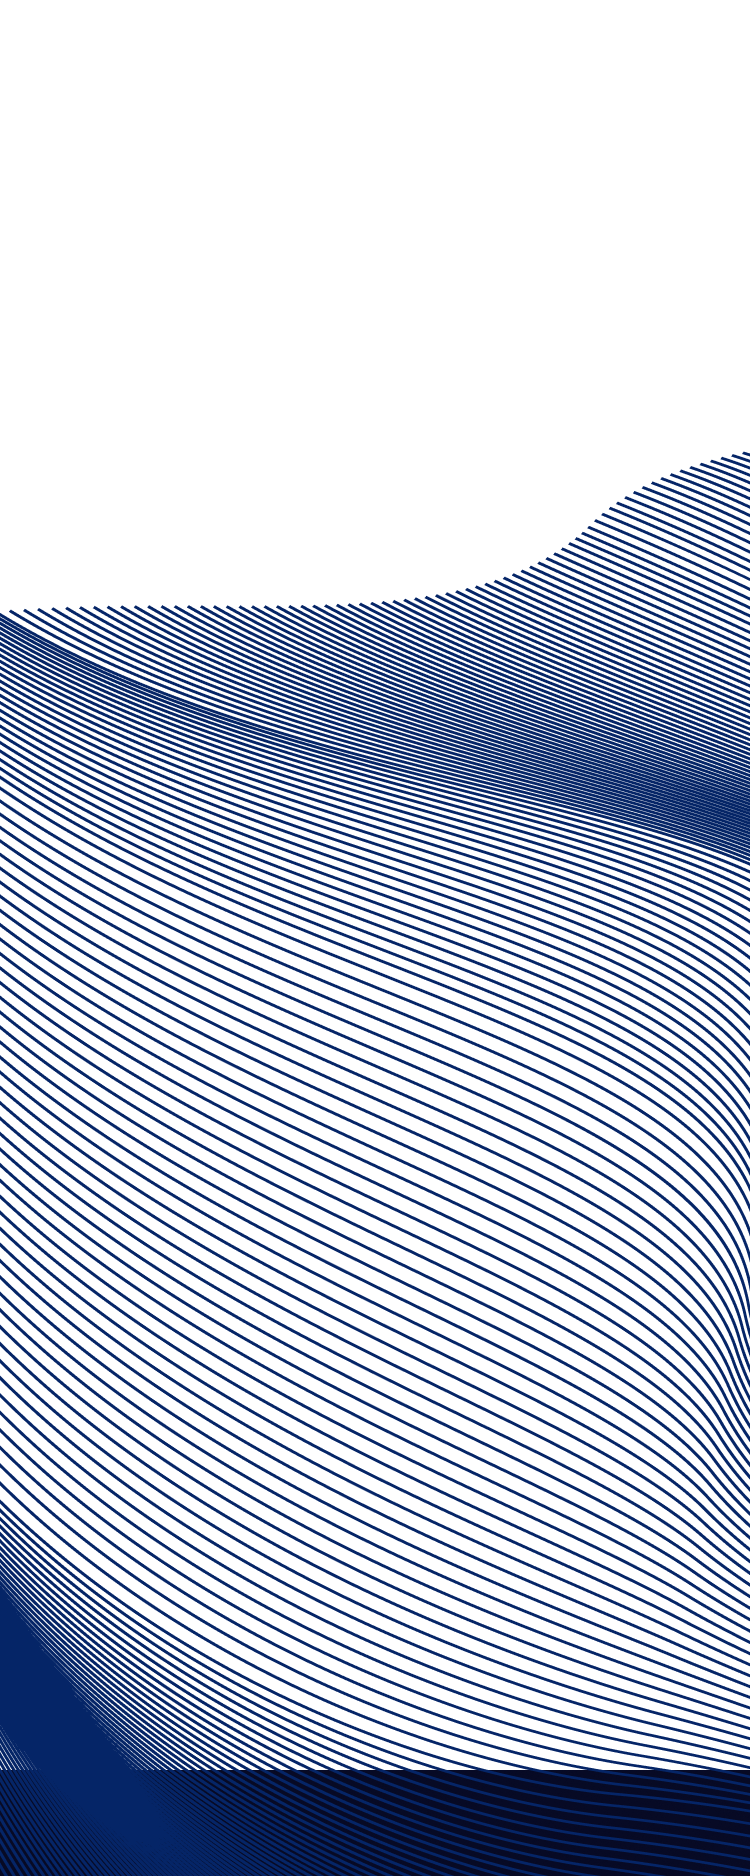 background blue with waves